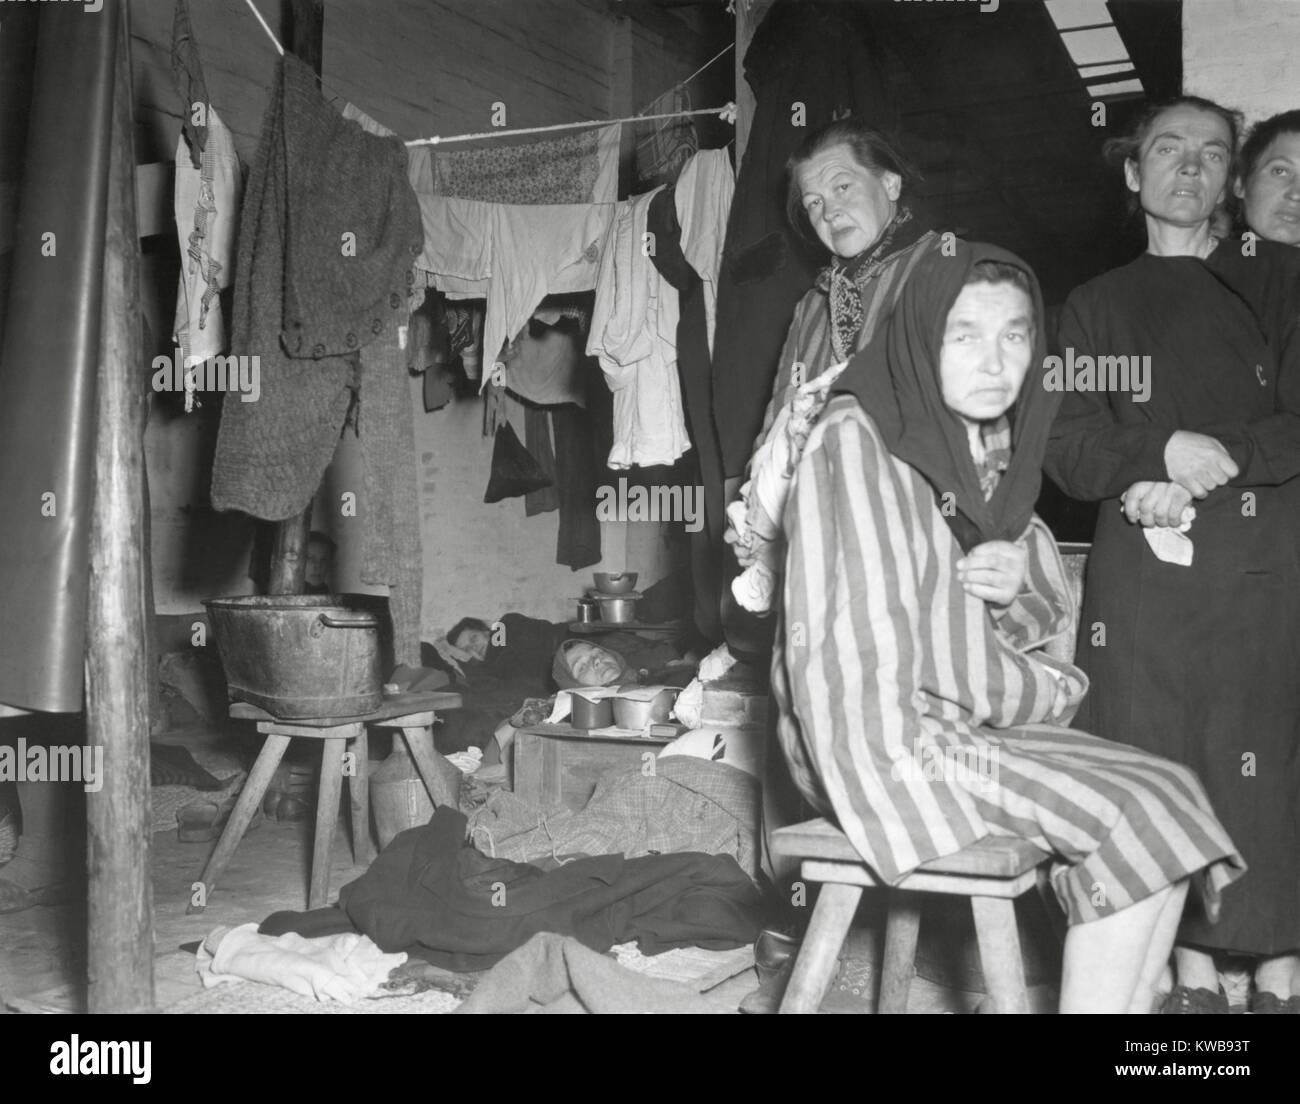 Liberated women in their barracks in former Nazi prison camp at Belsen, Germany. The women became displaced persons under the protection of the British 2nd Army. April 1945, World War 2. (BSLOC 2014 10 178) Stock Photo